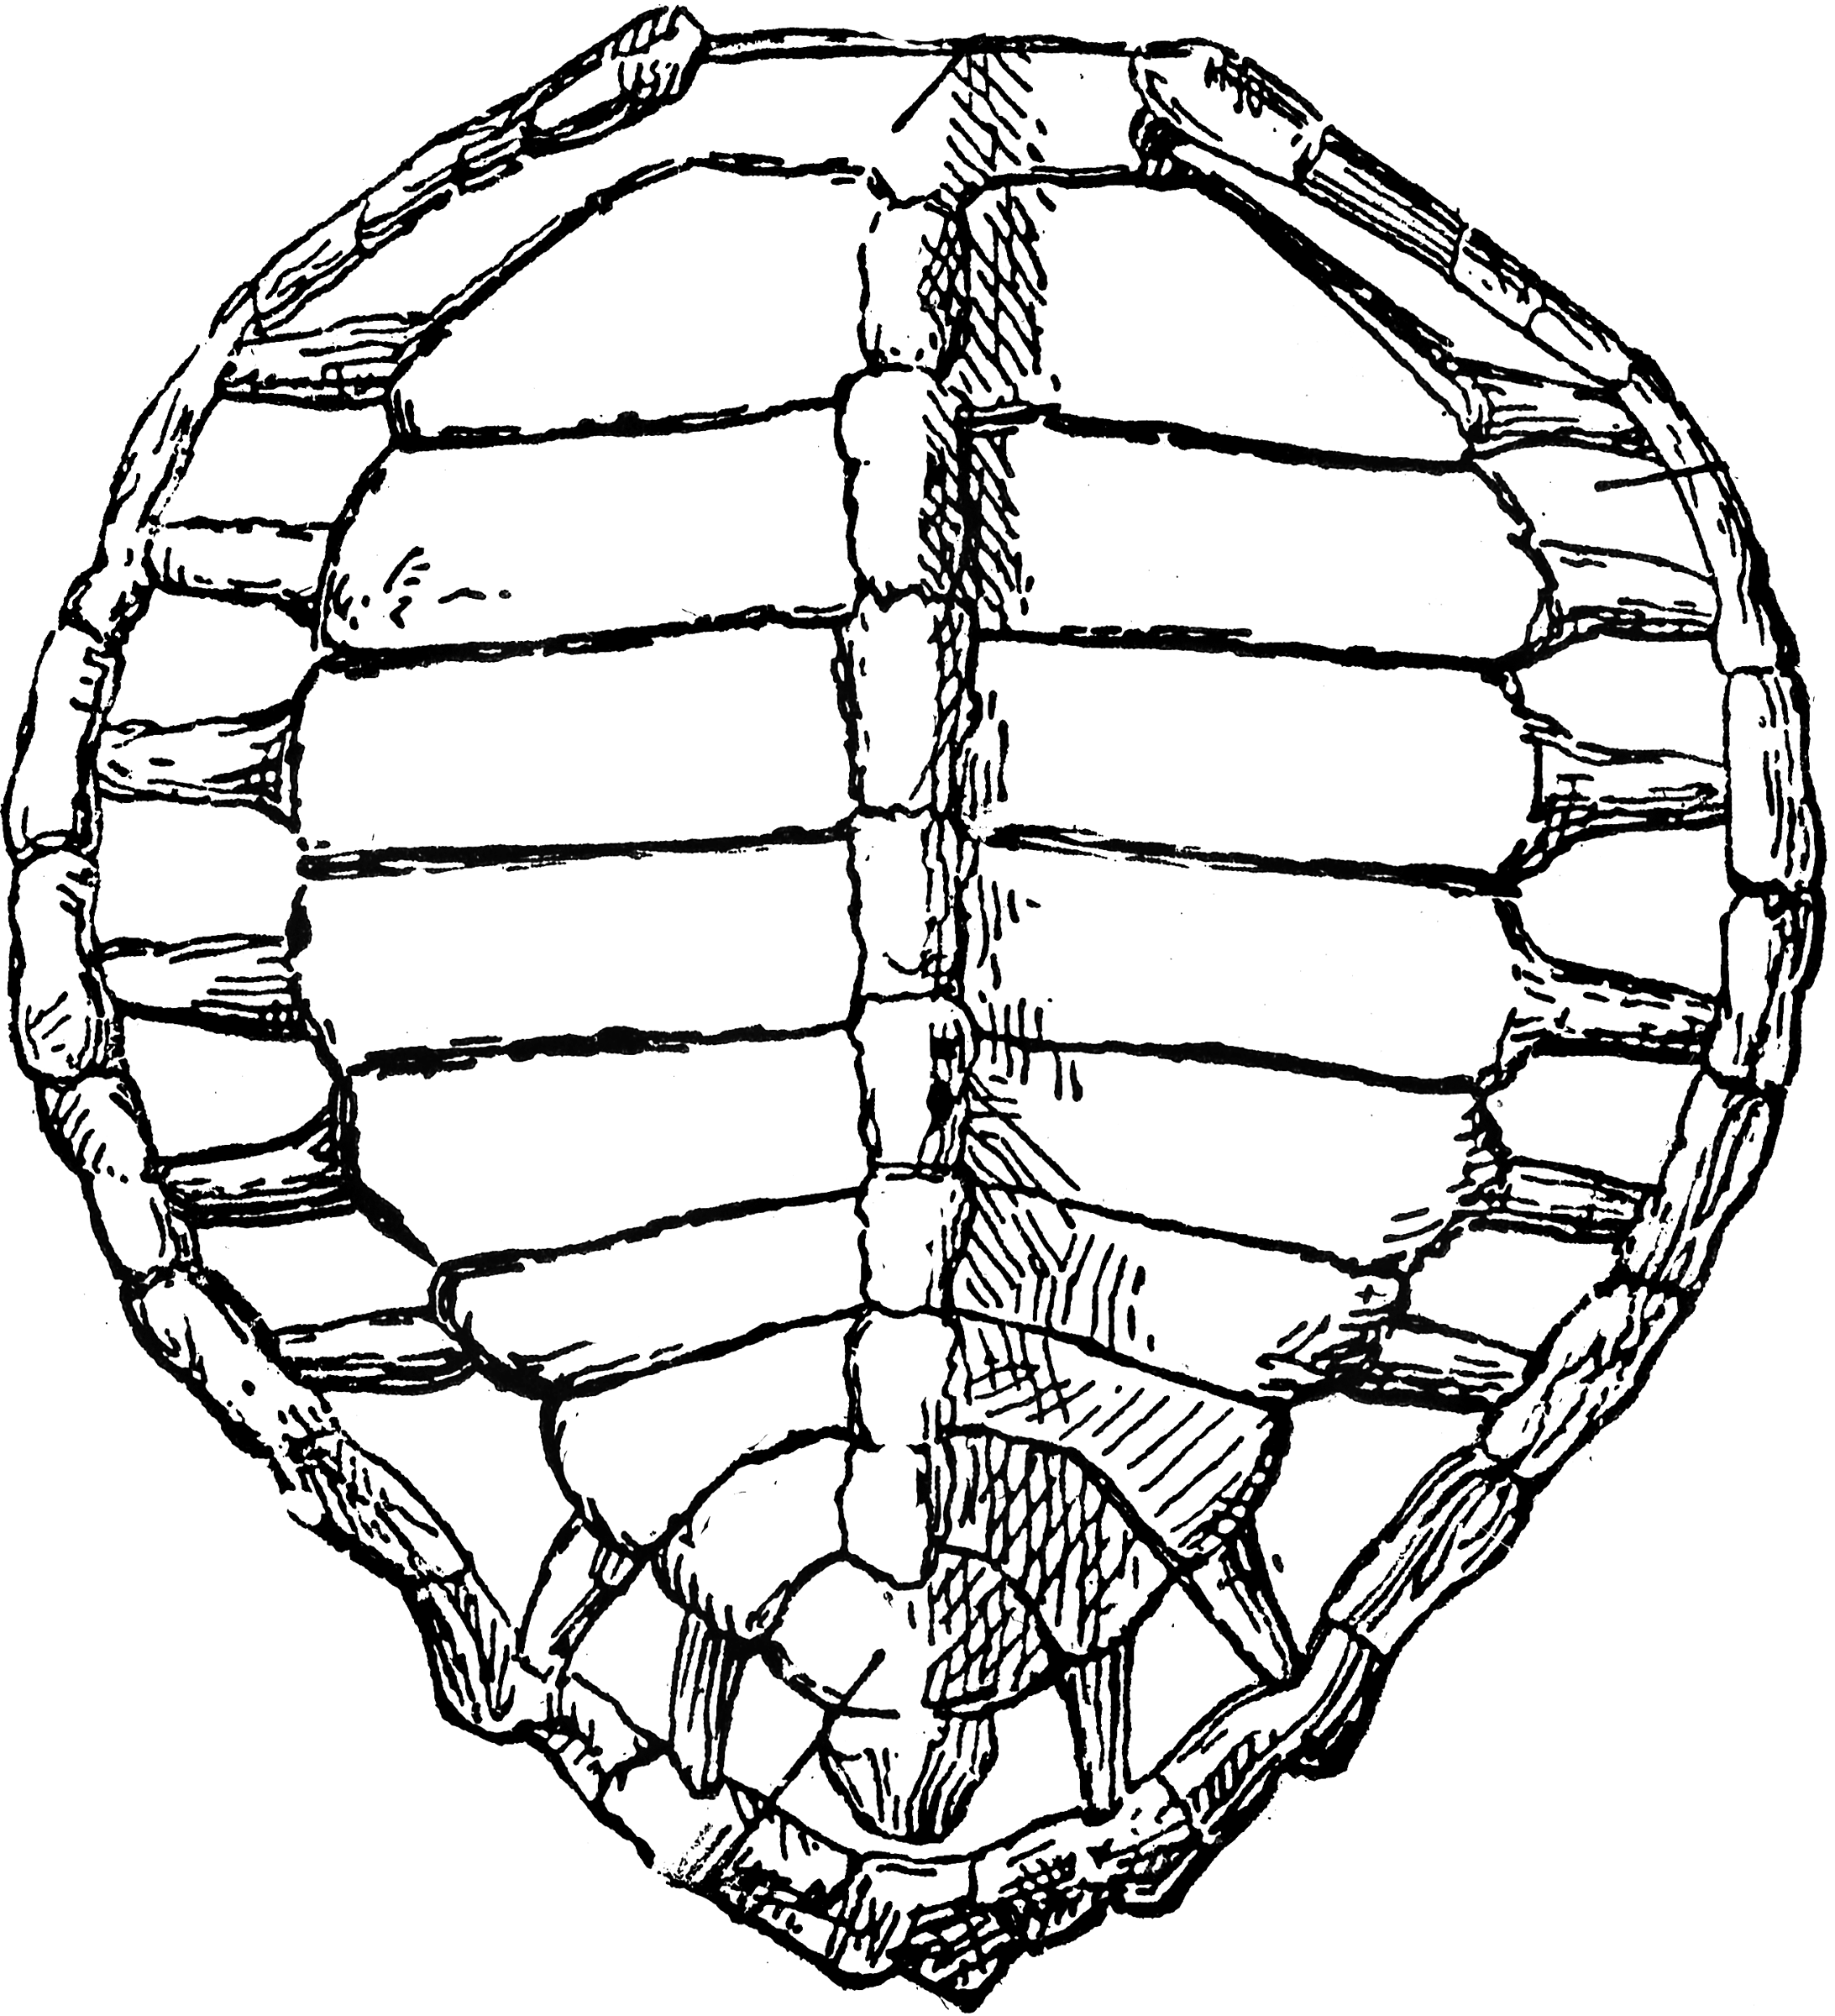 Turtle Shell | ClipArt ETC